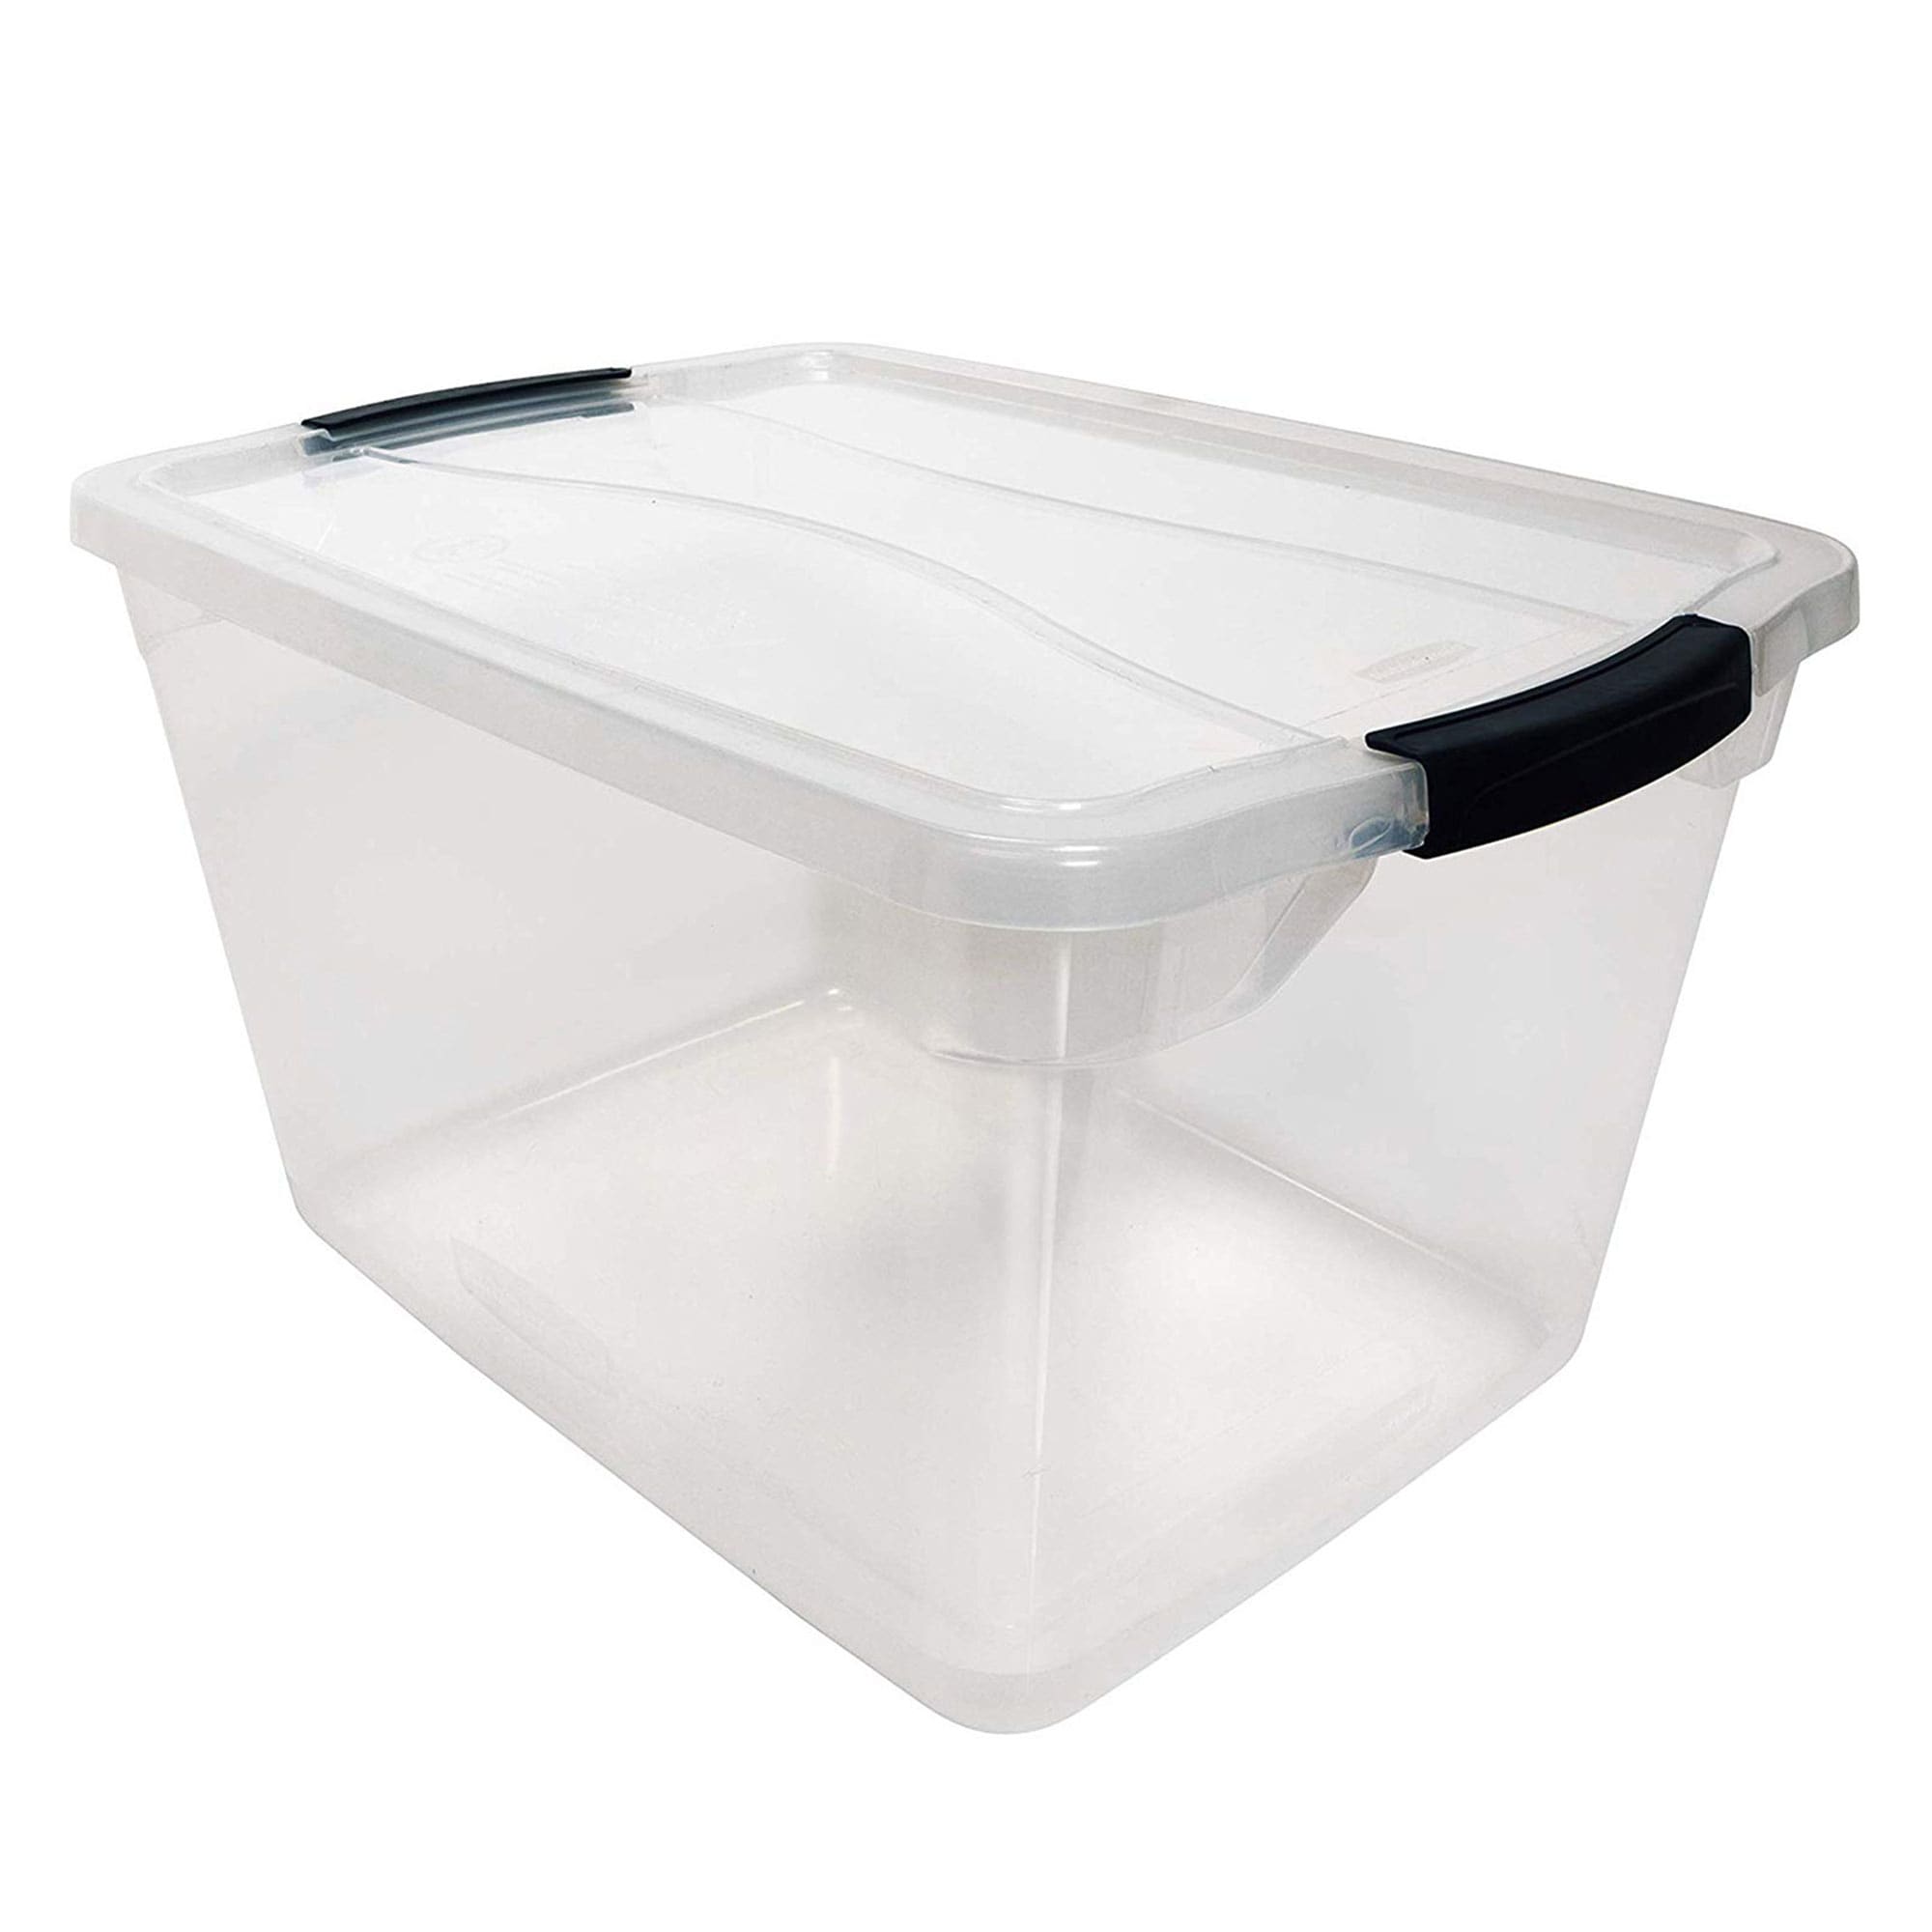 Rubbermaid 30 Qt. Cleverstore Clear Tote - Sun City Hardware